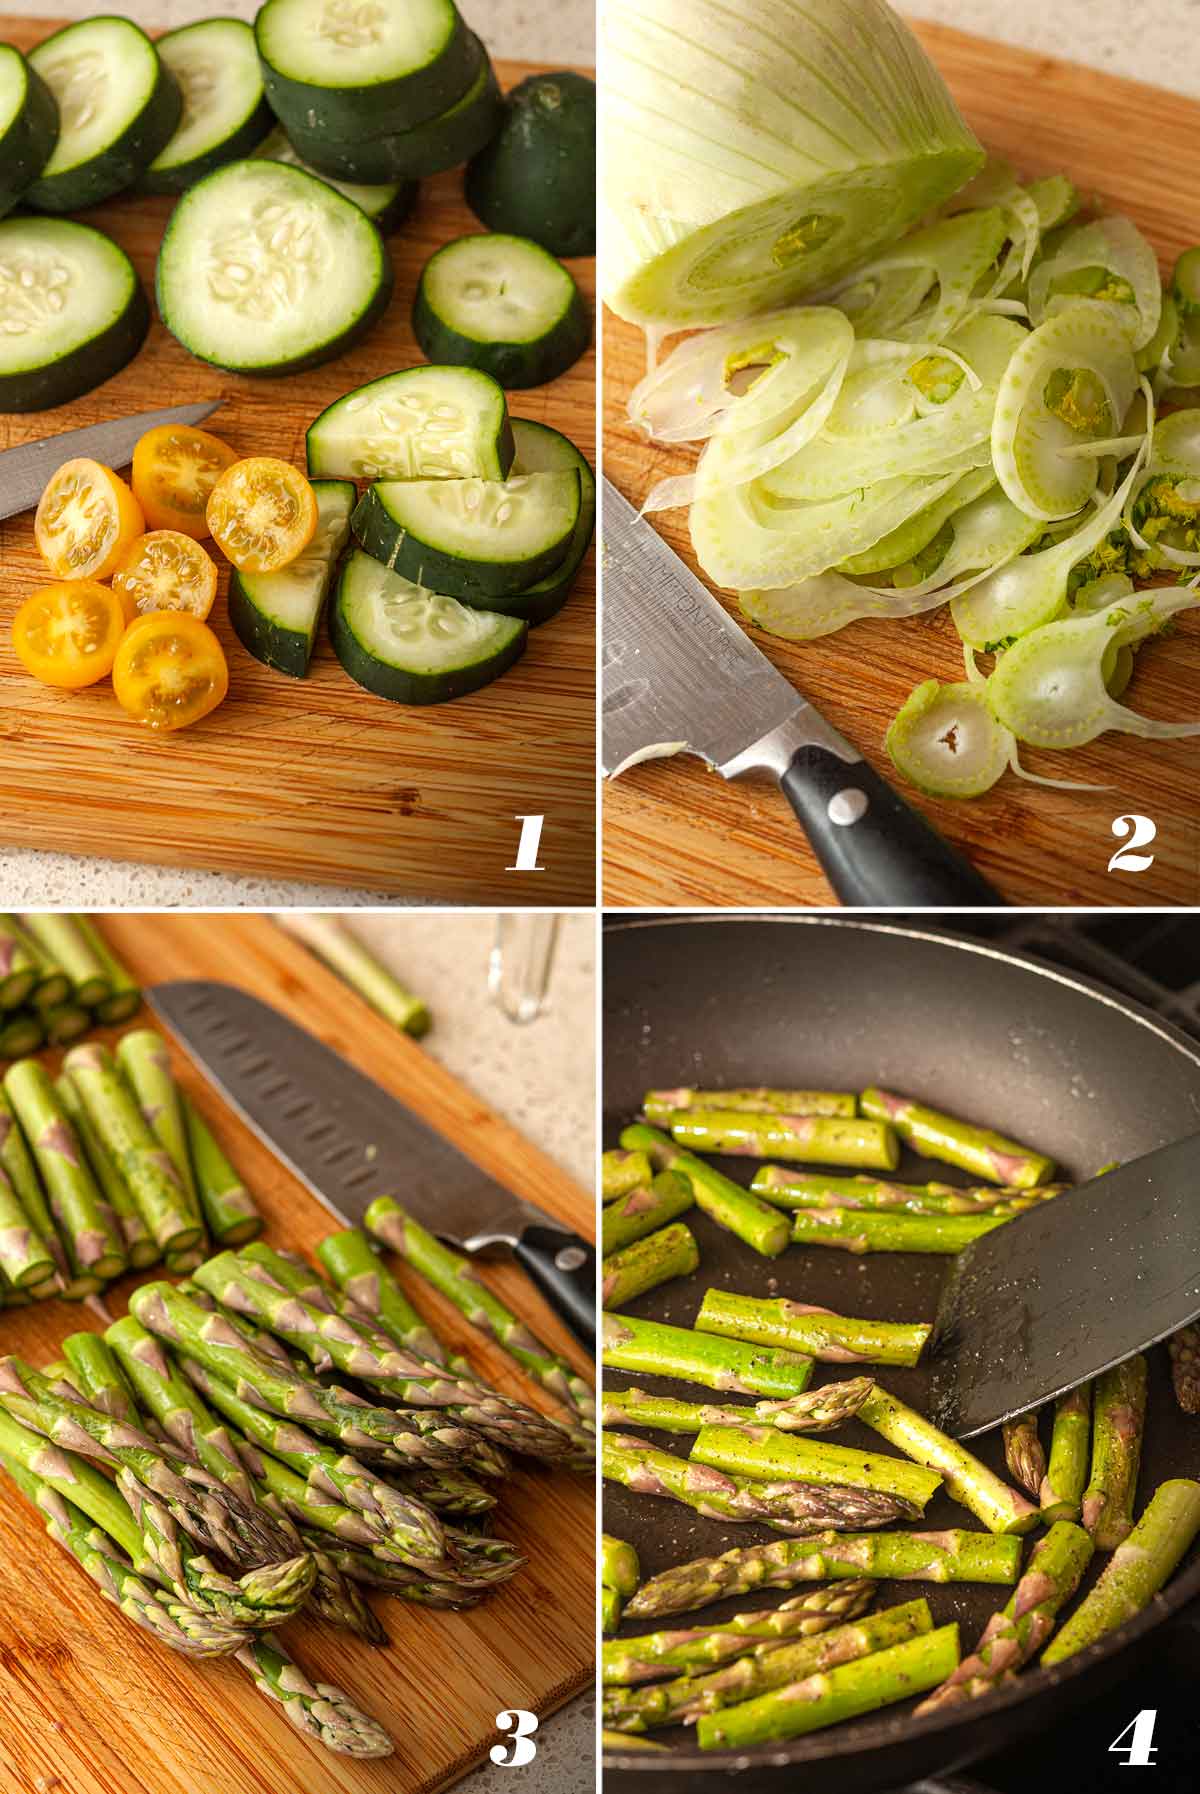 A collage of 4 numbered images showing how to prepare ingredients for salad.